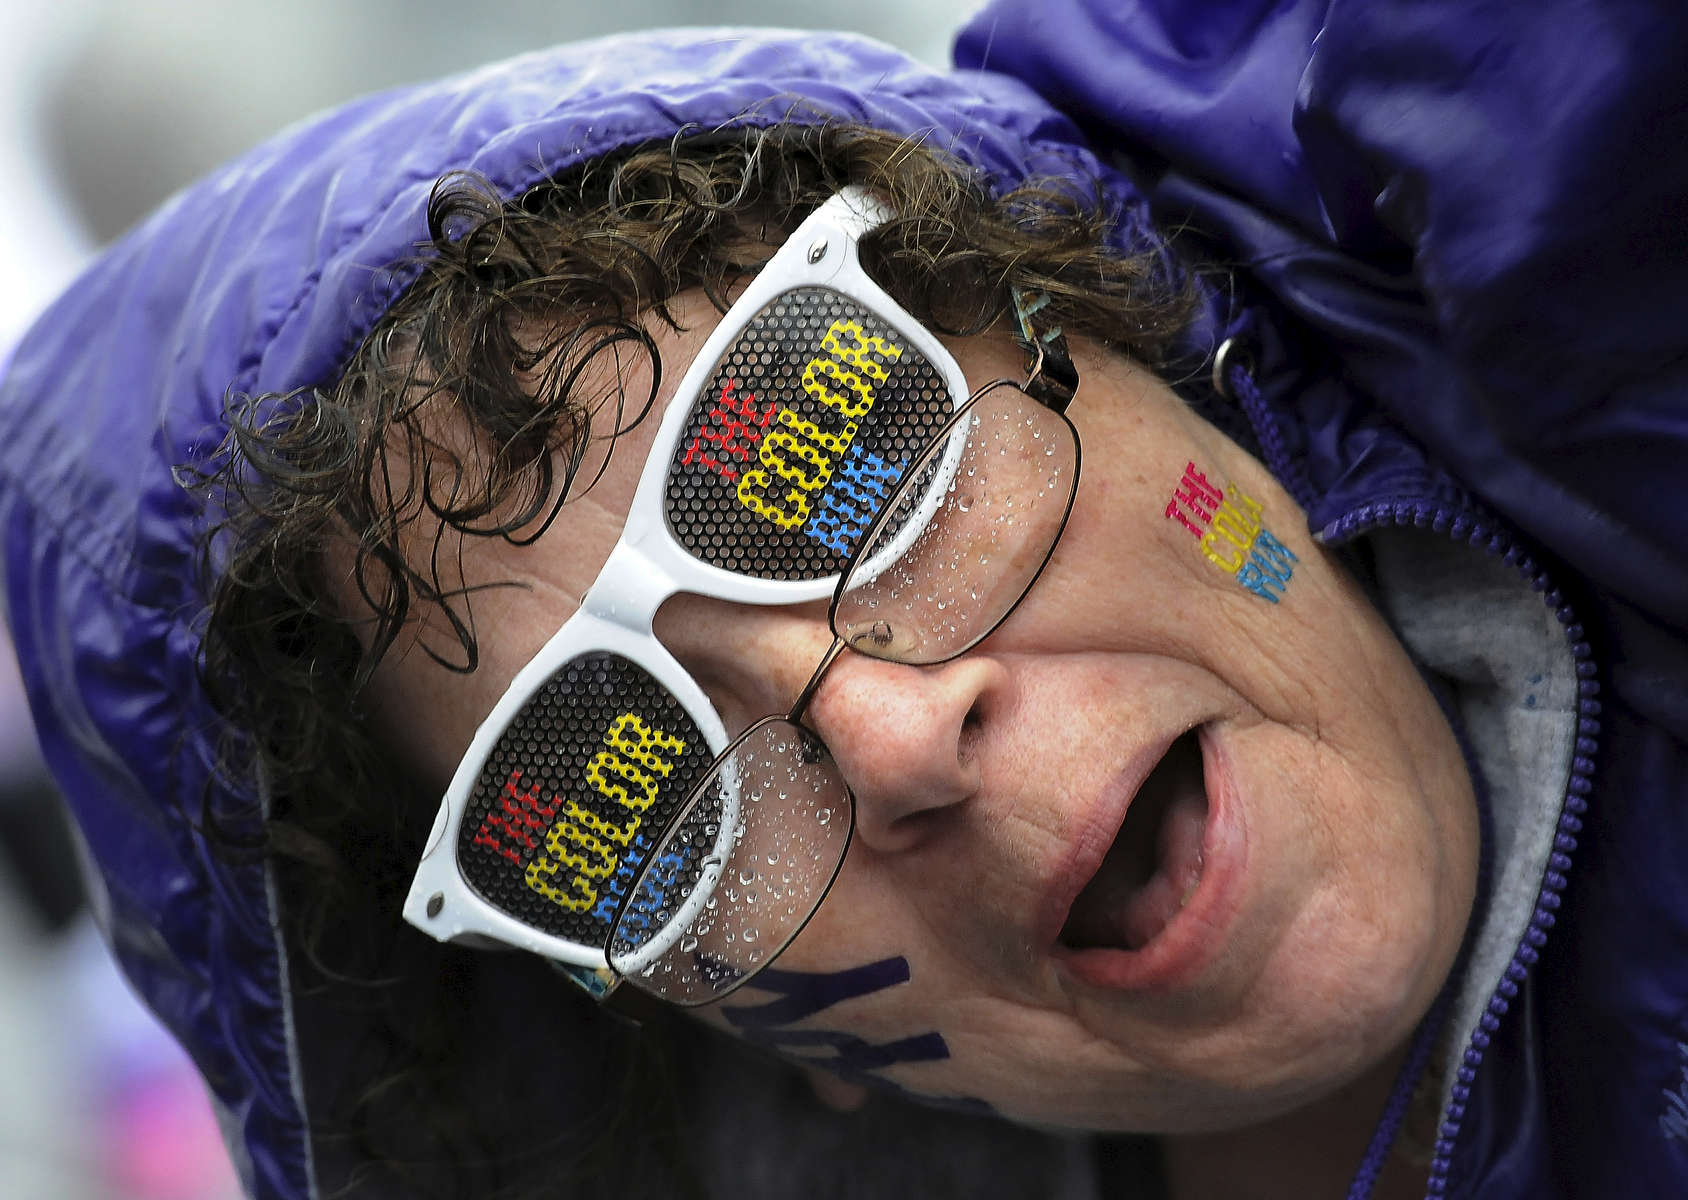 A participate shows her support for the Color Run in Nashville,Tenn. (Mark Zaleski/ For The Tennessean)